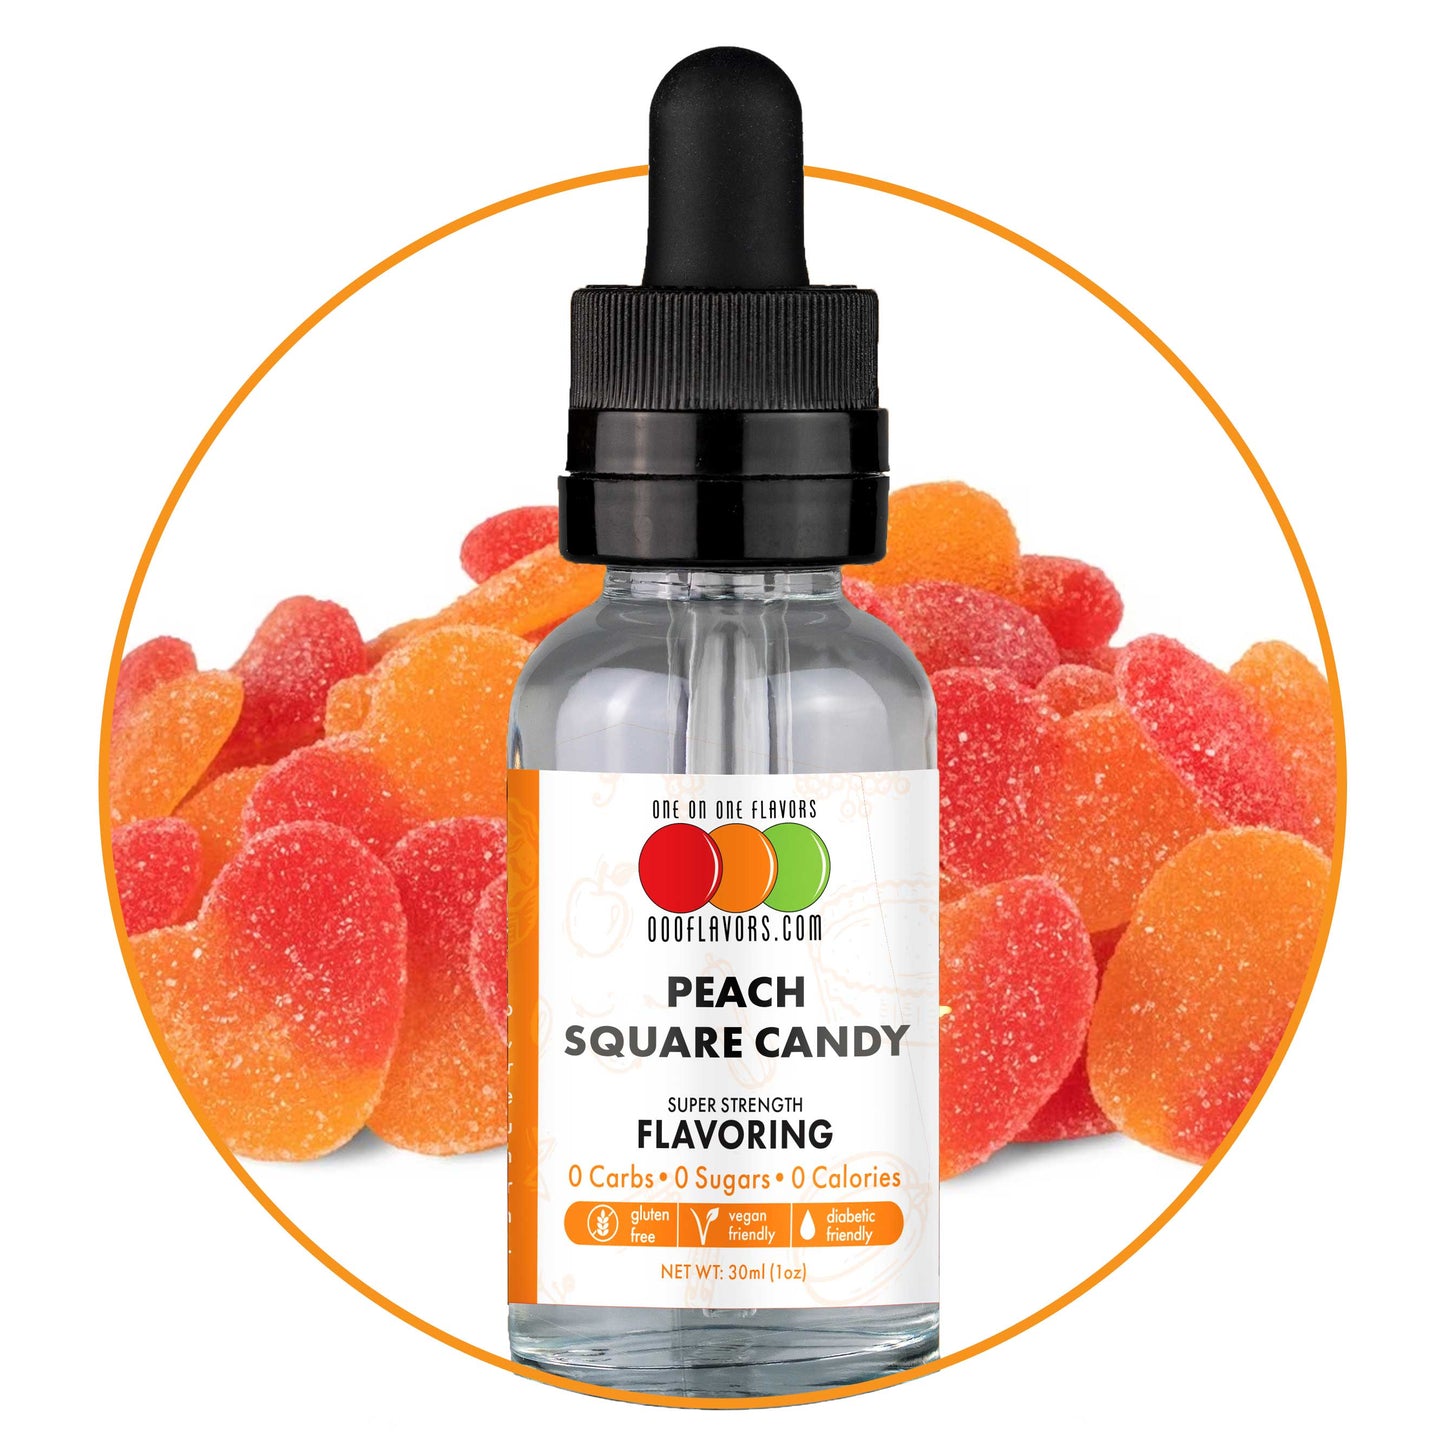 Peach Square Candy Type Flavored Liquid Concentrate